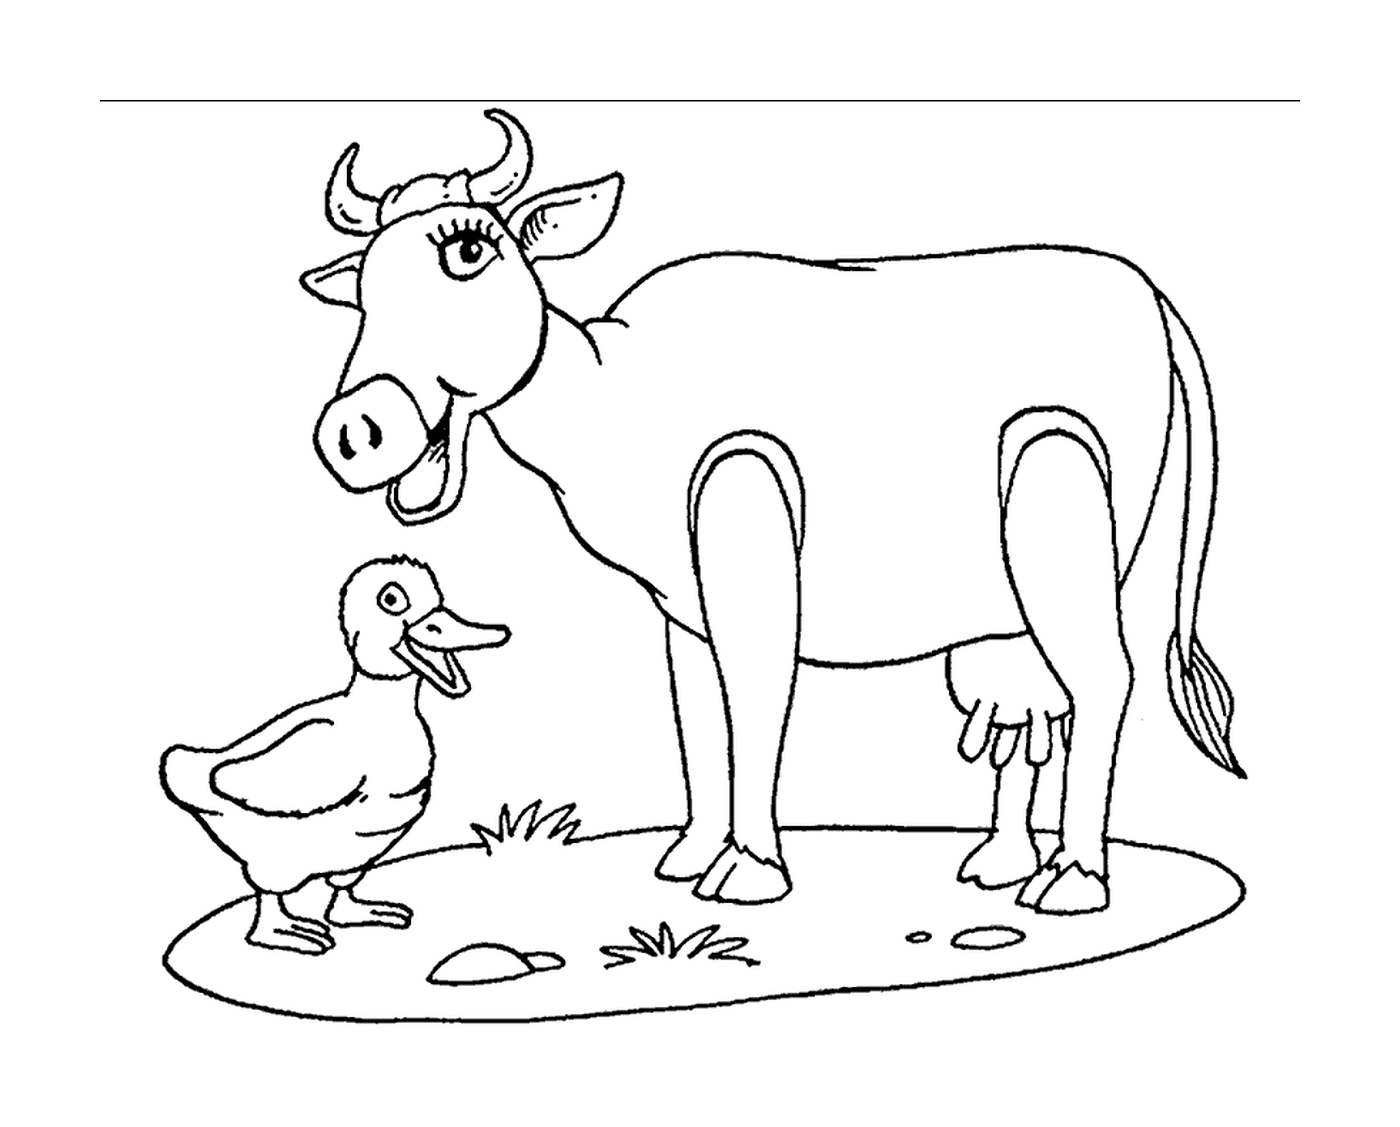  A cow with a duck 